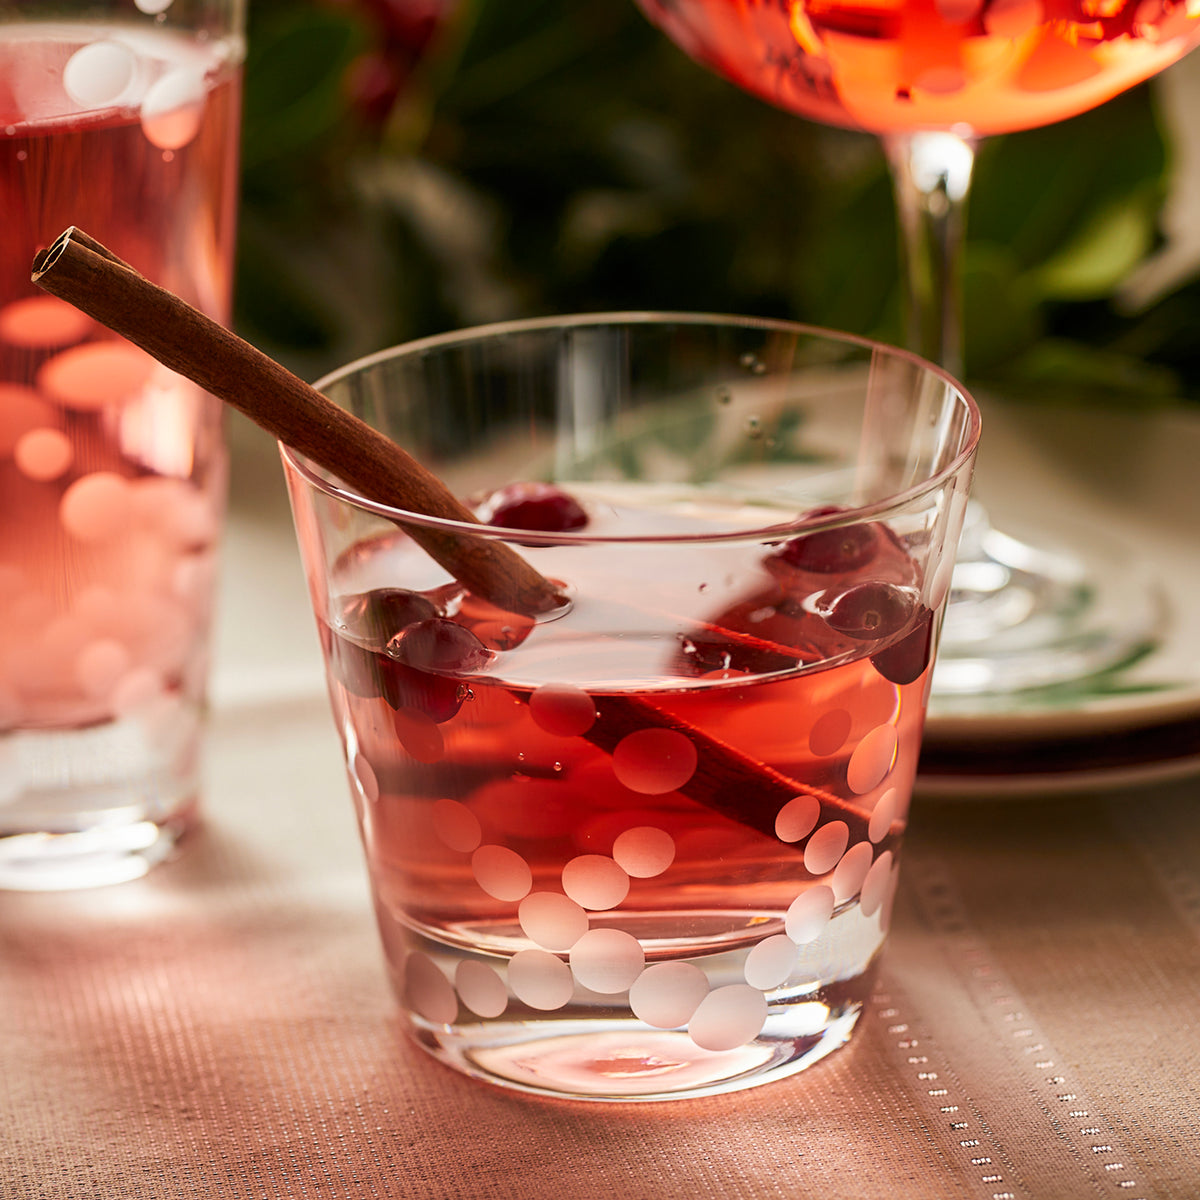 A glass of Chatham Pop Tumblers cranberry juice with a polka-dot pattern.